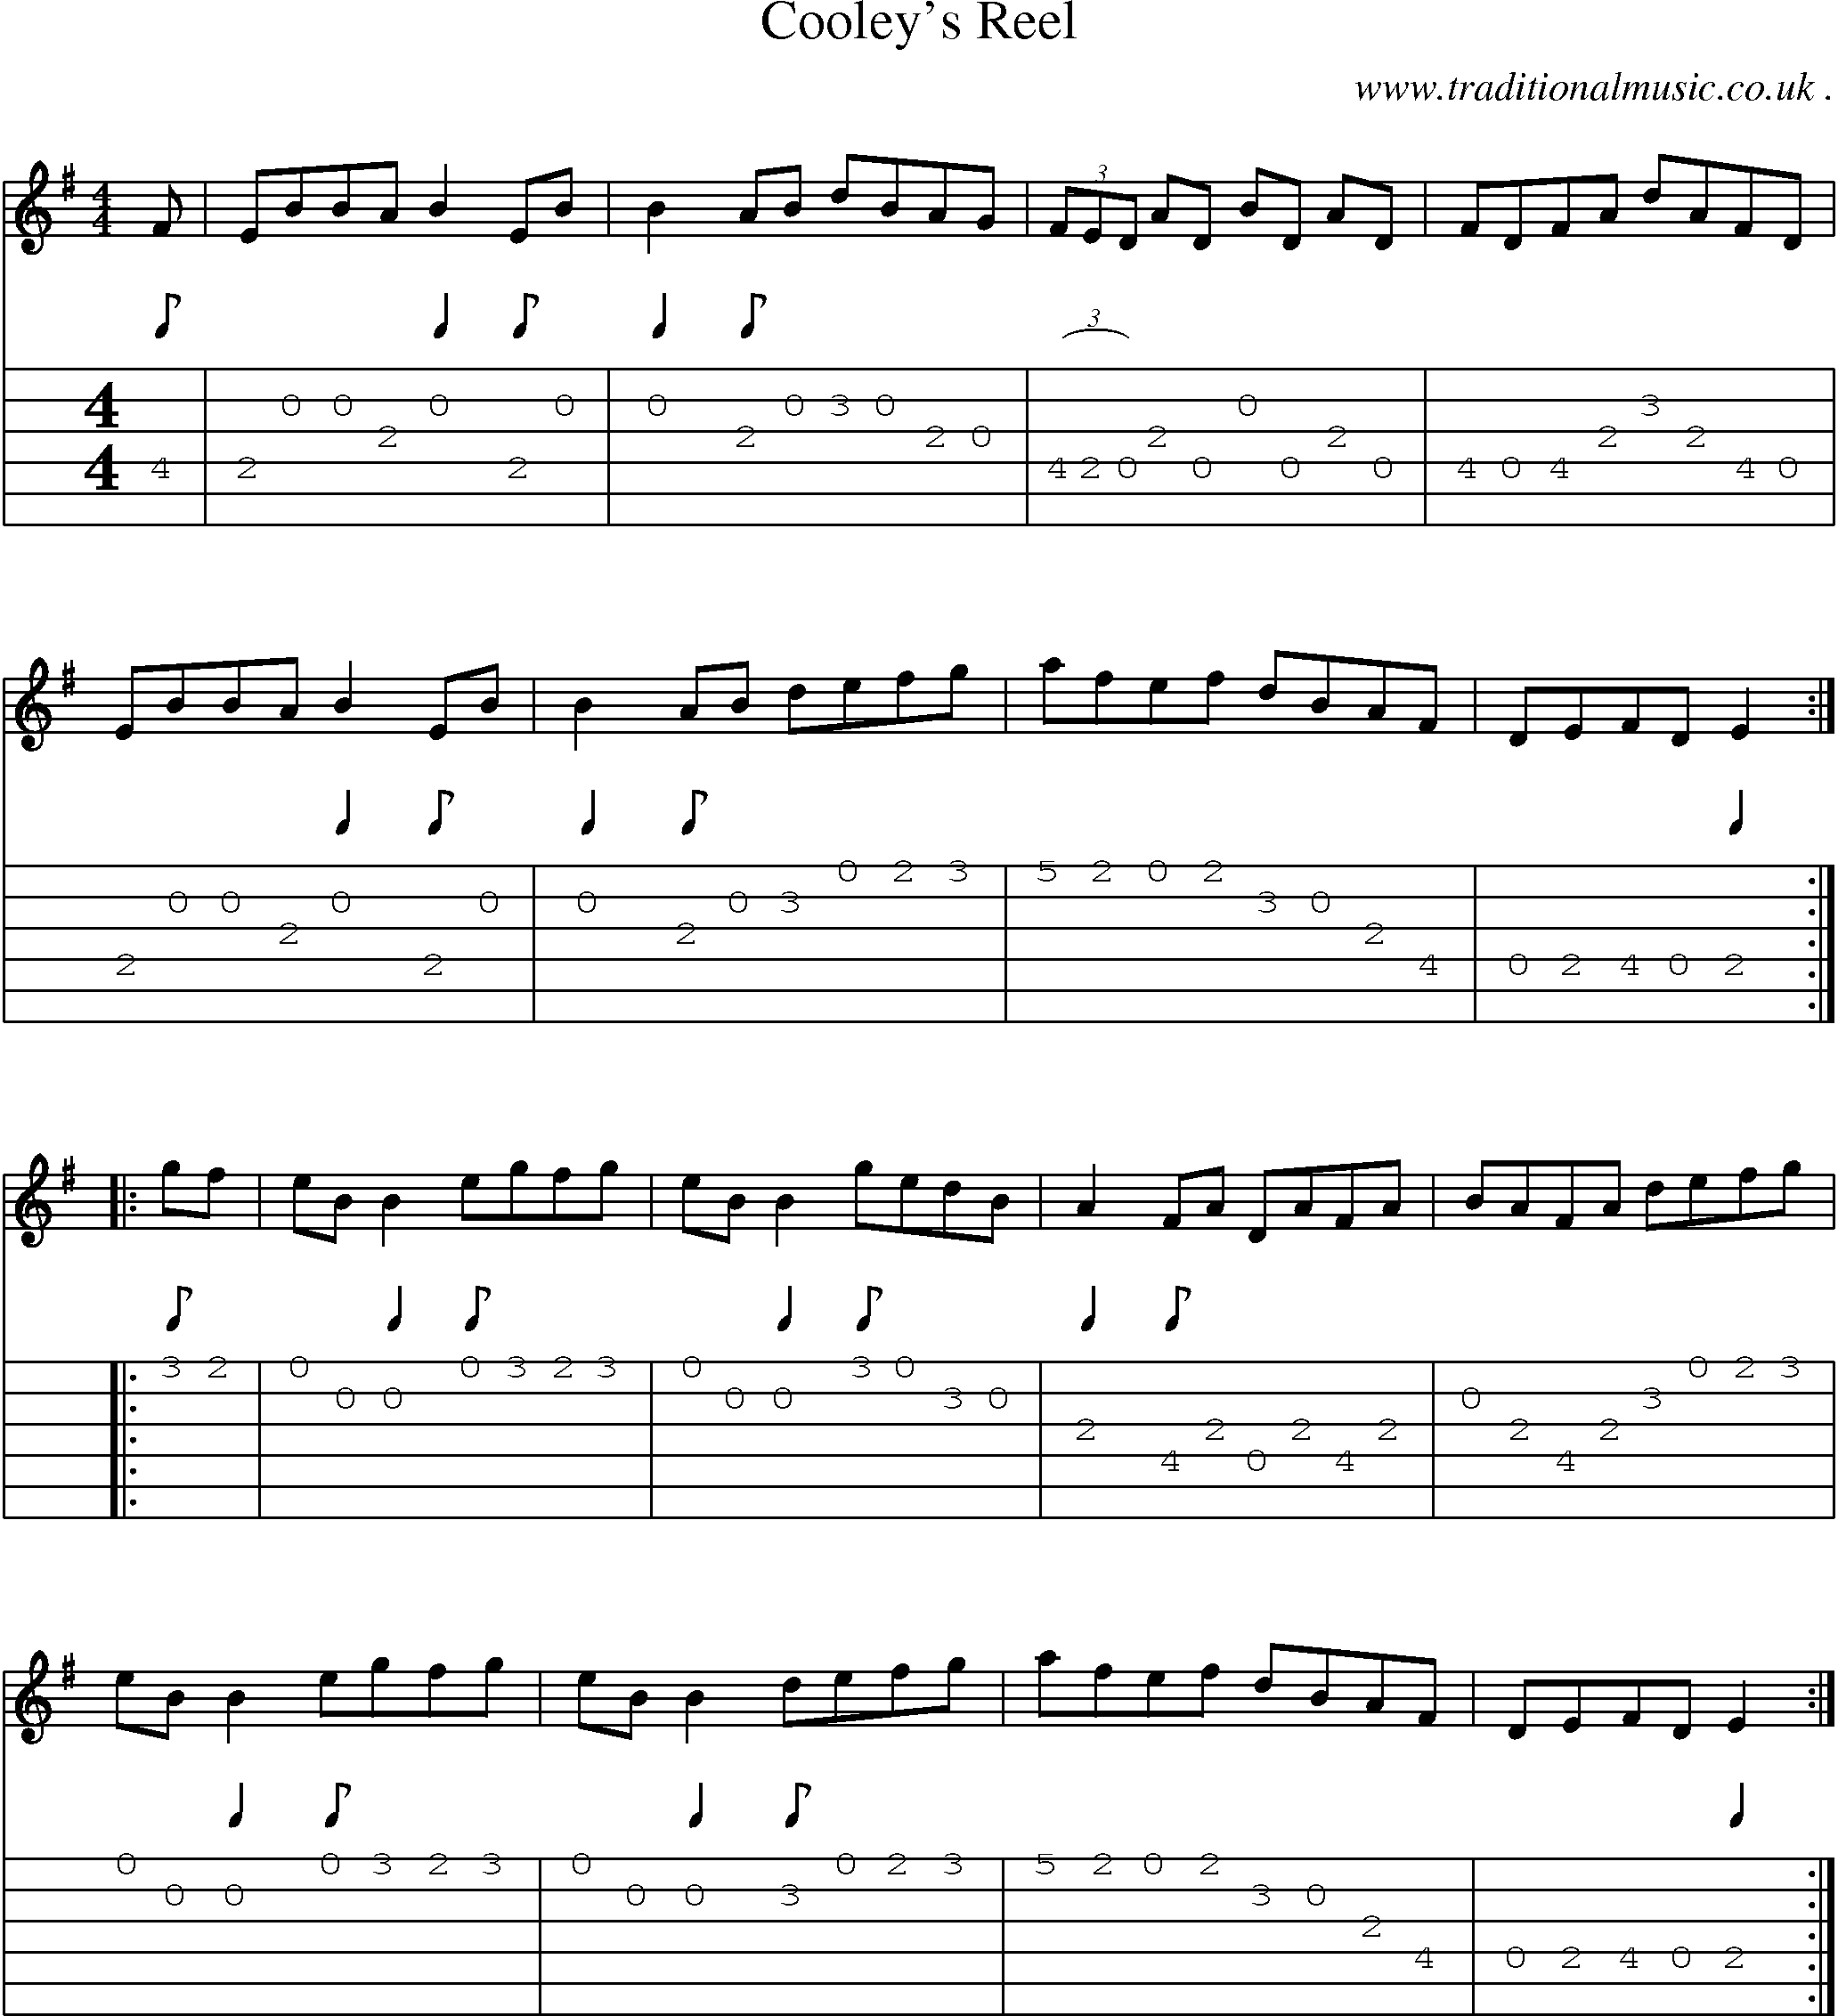 Sheet-Music and Guitar Tabs for Cooleys Reel